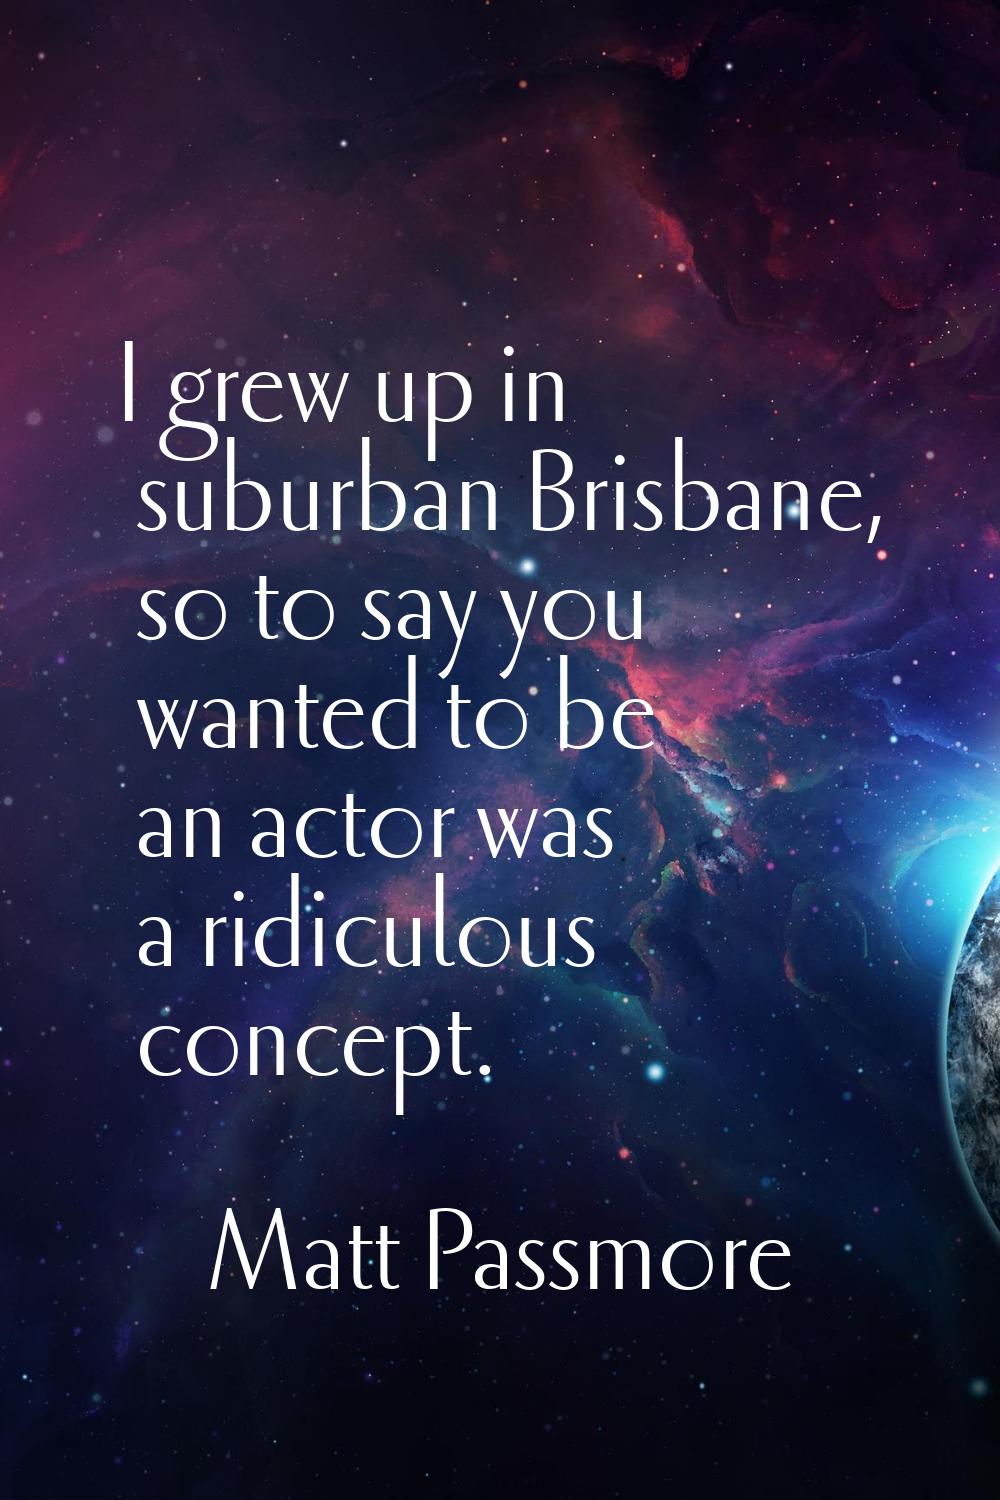 I grew up in suburban Brisbane, so to say you wanted to be an actor was a ridiculous concept.